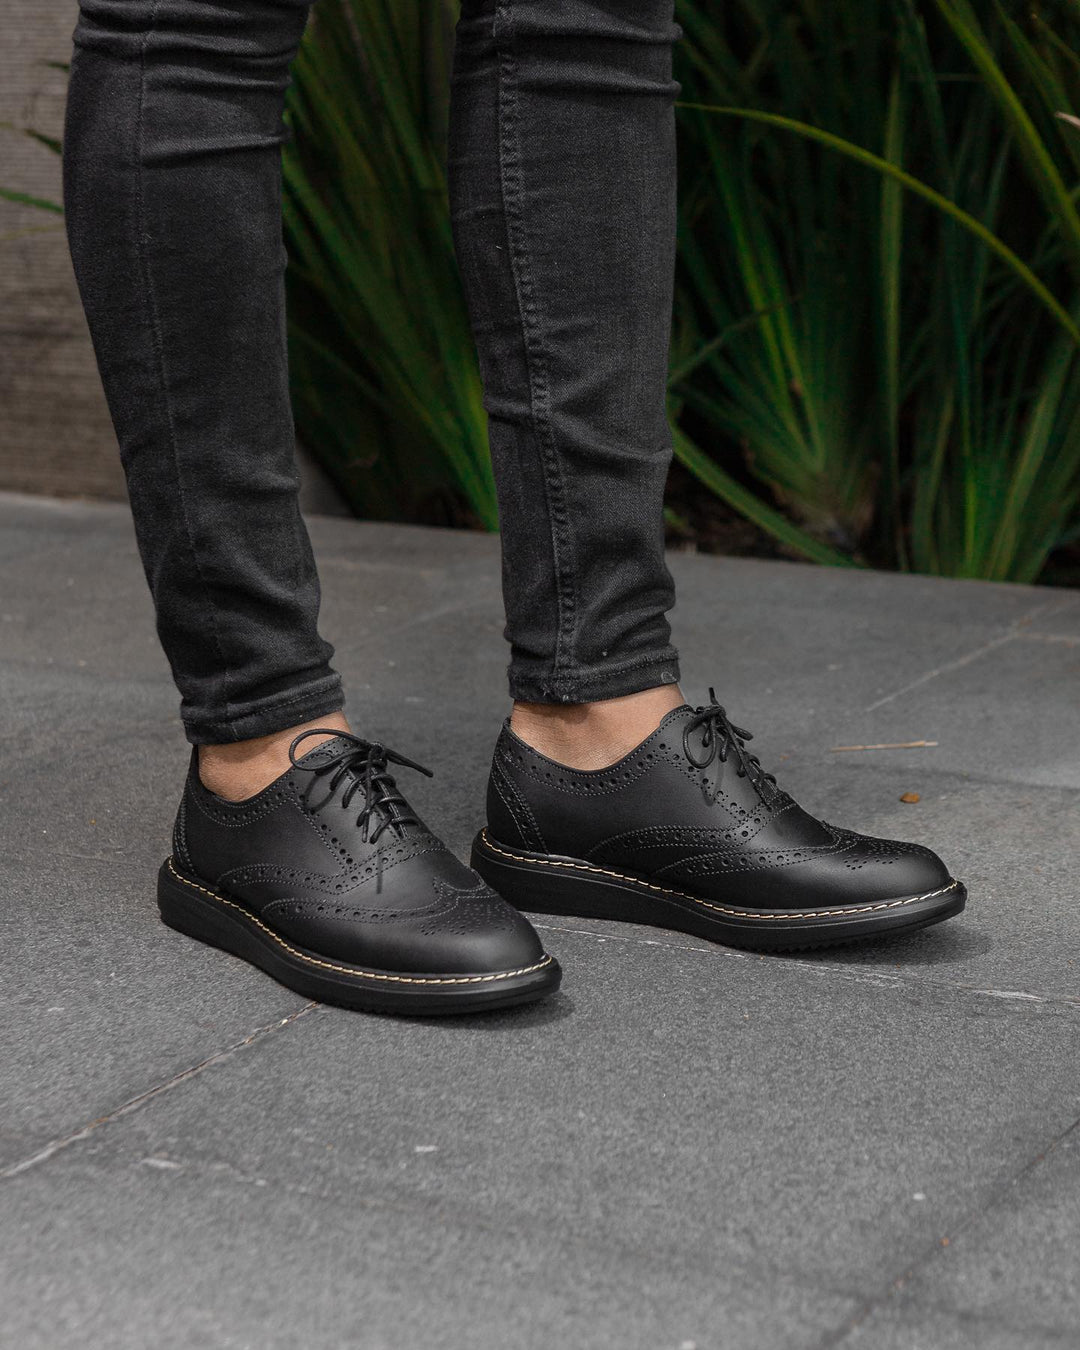 Wingtip Oxfords full brogue black leather